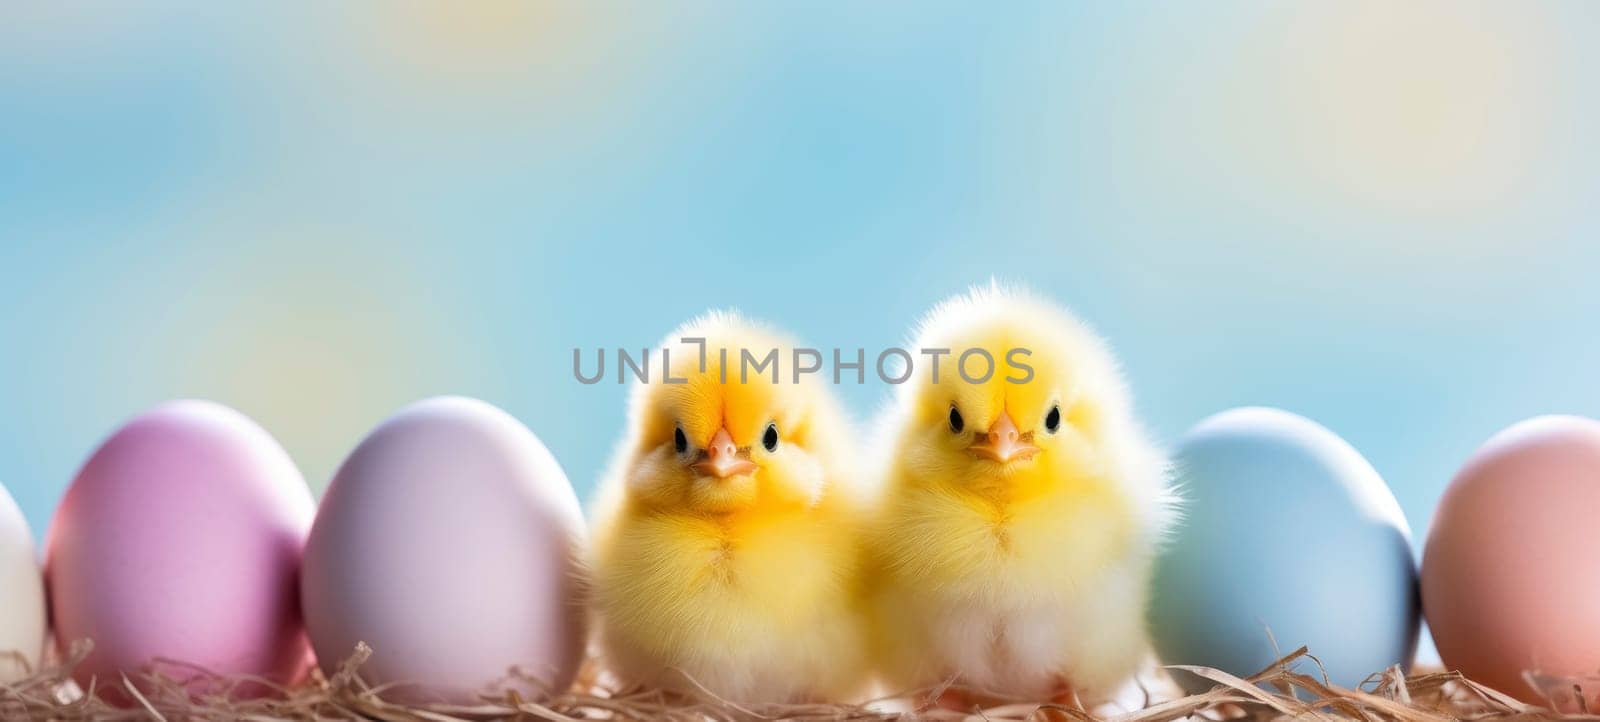 Two fluffy yellow chicks sitting beside pastel-colored Easter eggs on a gentle blue background.